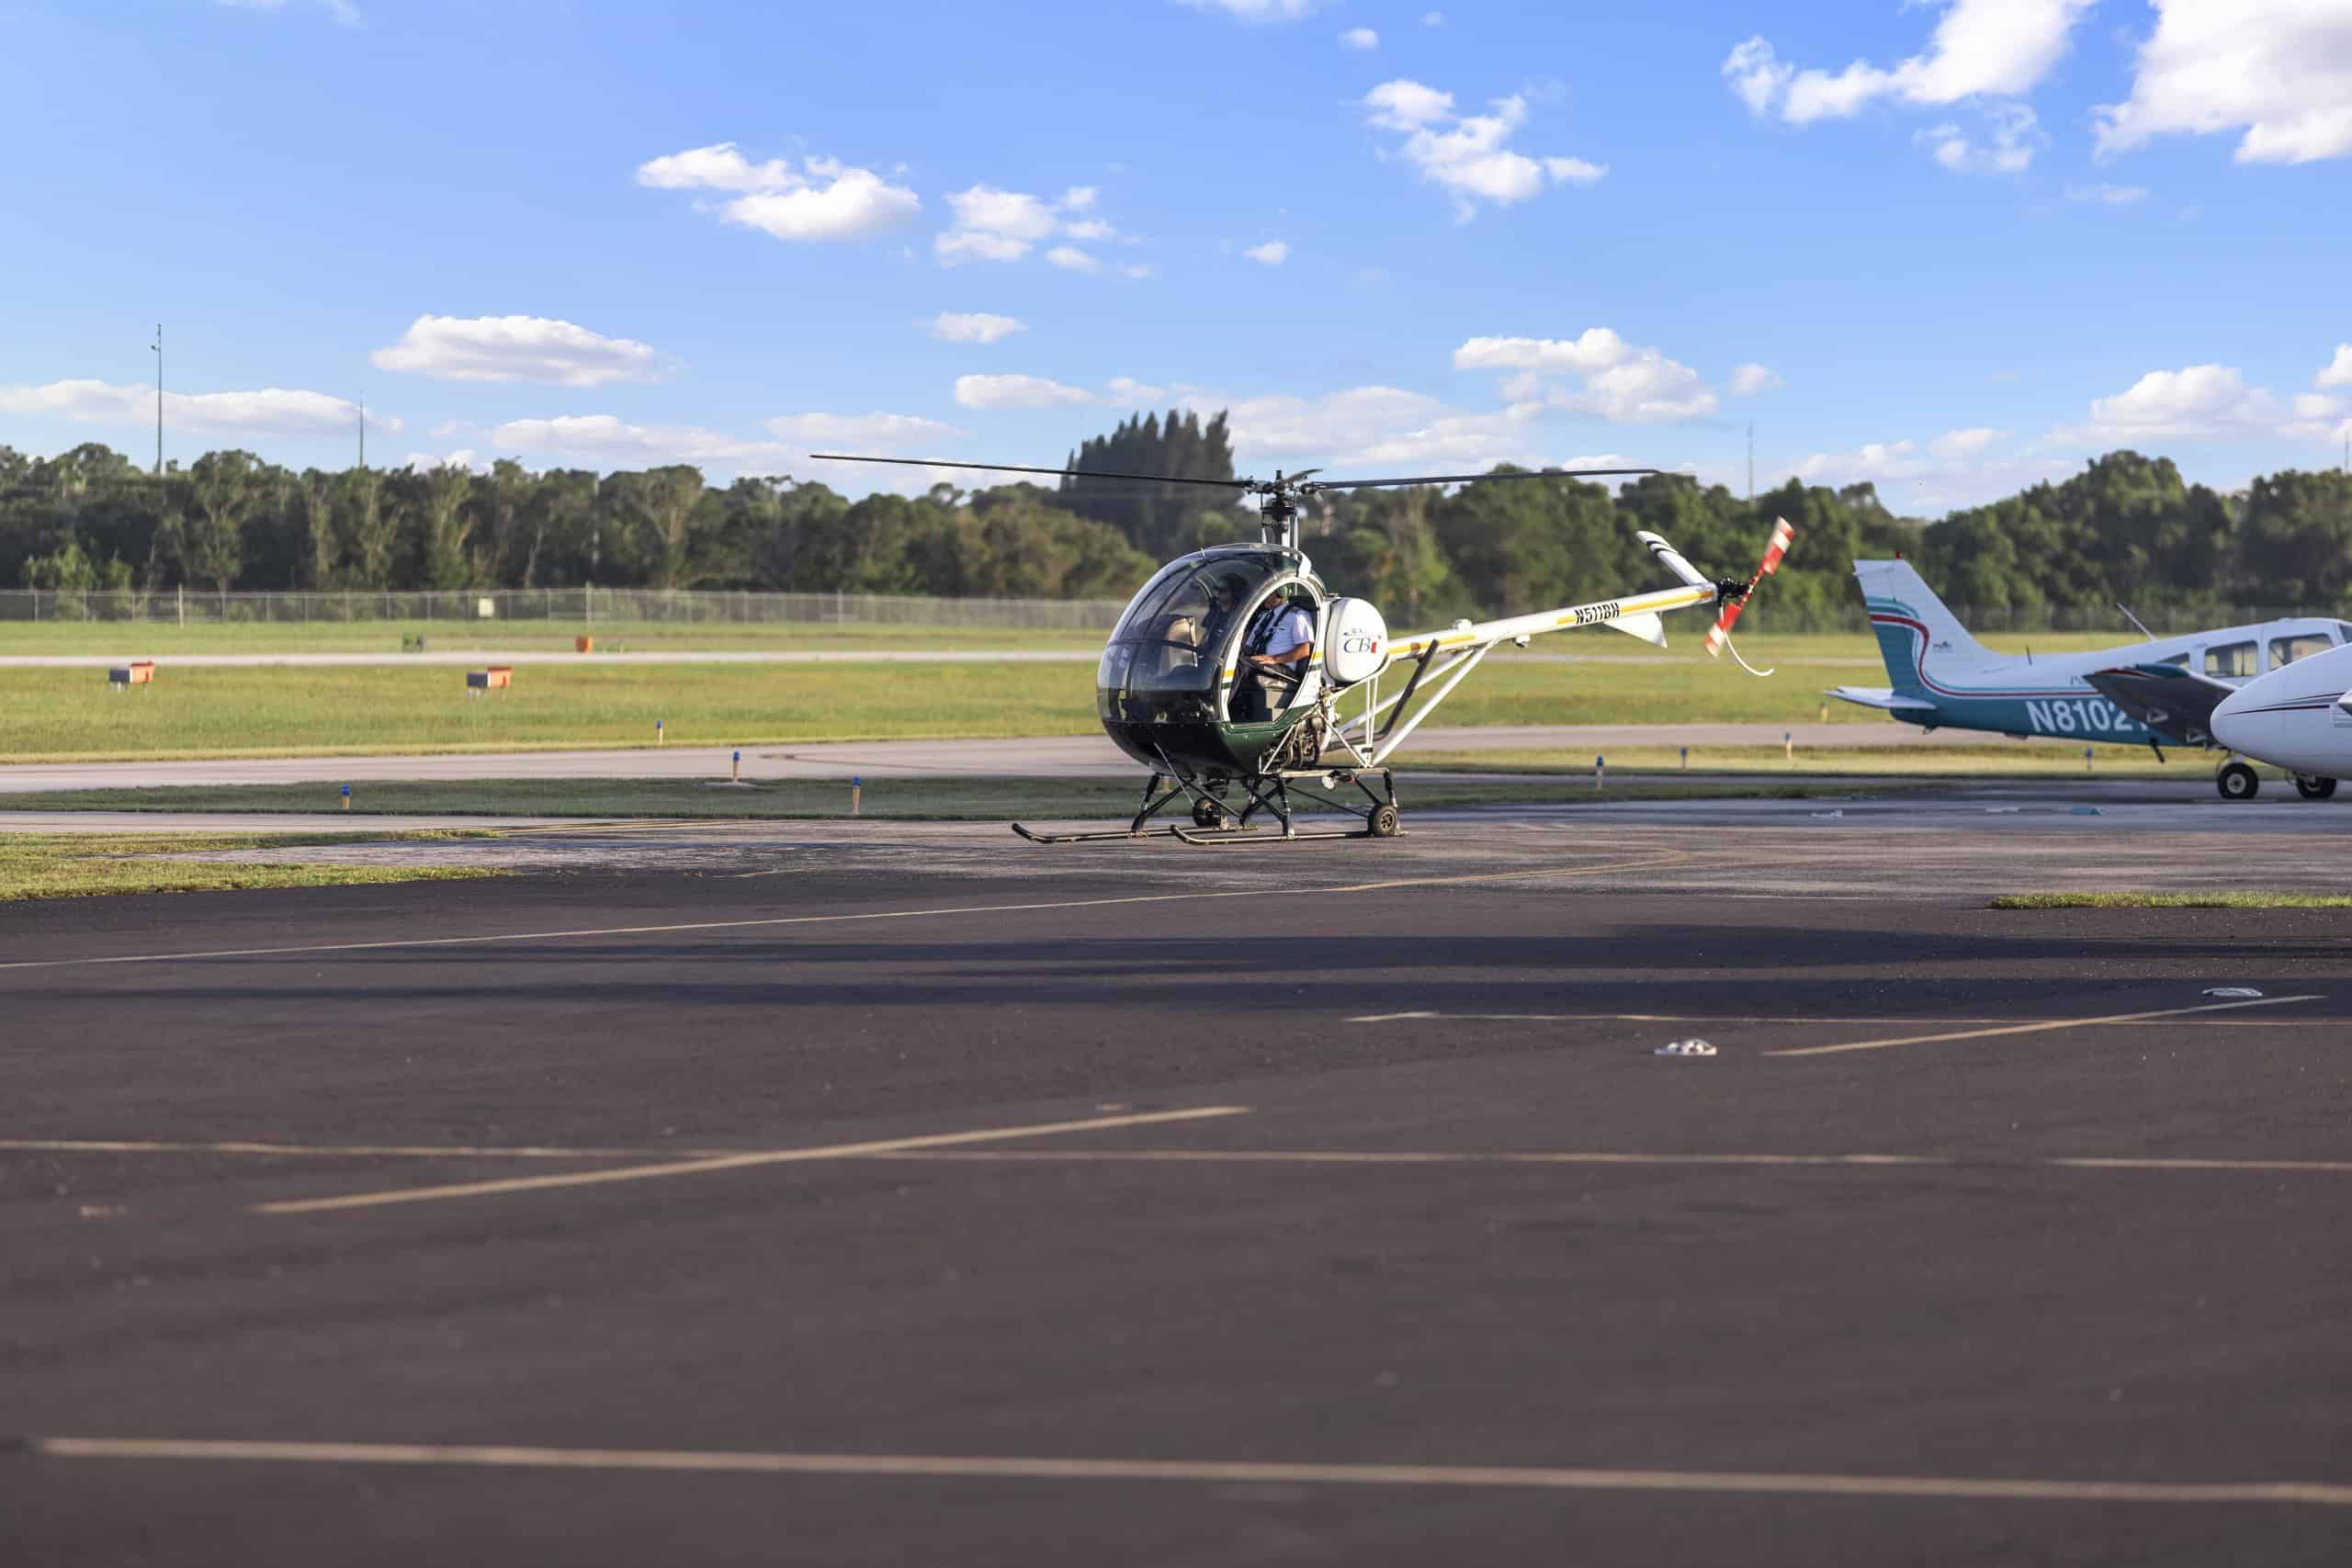 Photo of a helicopter landing on the tarmac